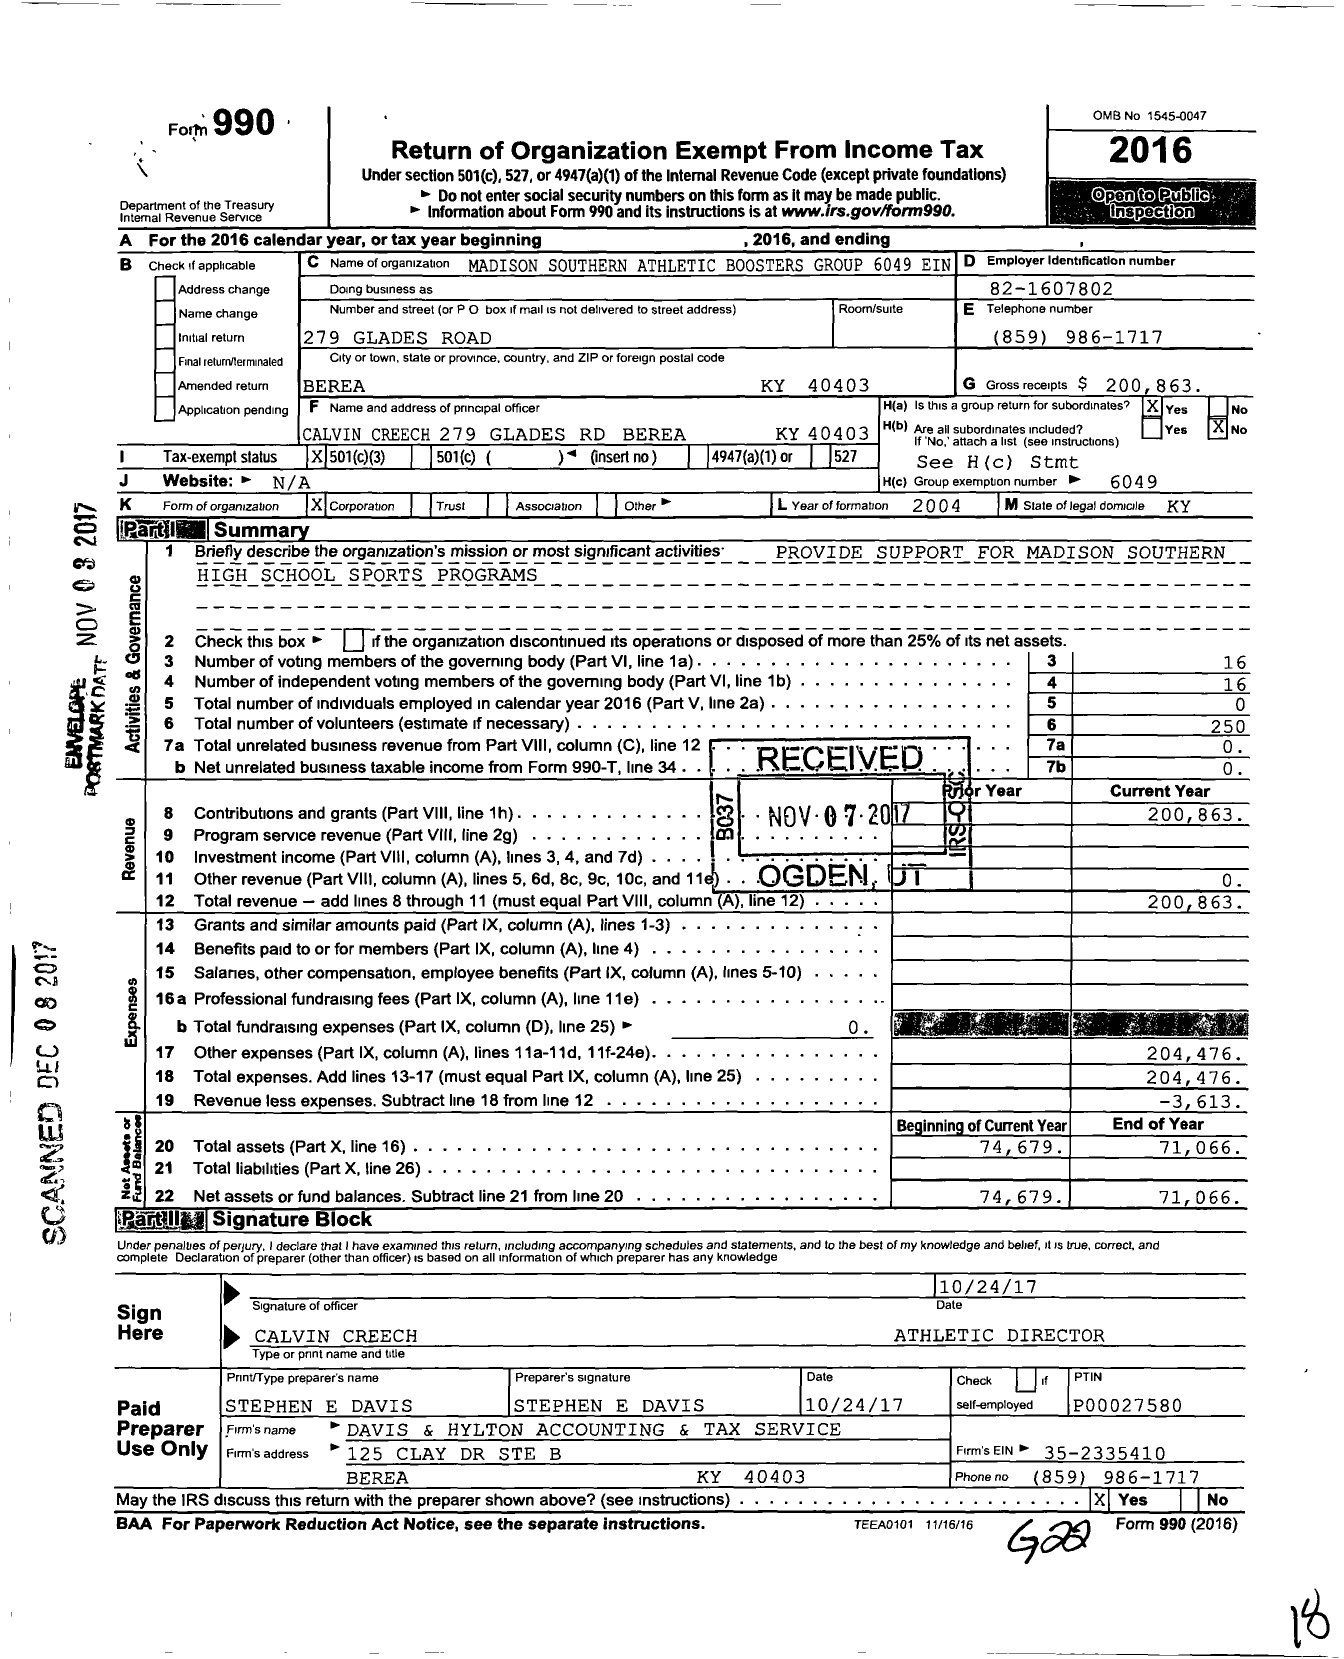 Image of first page of 2016 Form 990 for Madison Southern Athletic Boosters Group 6049 Ein - Group Return 6049